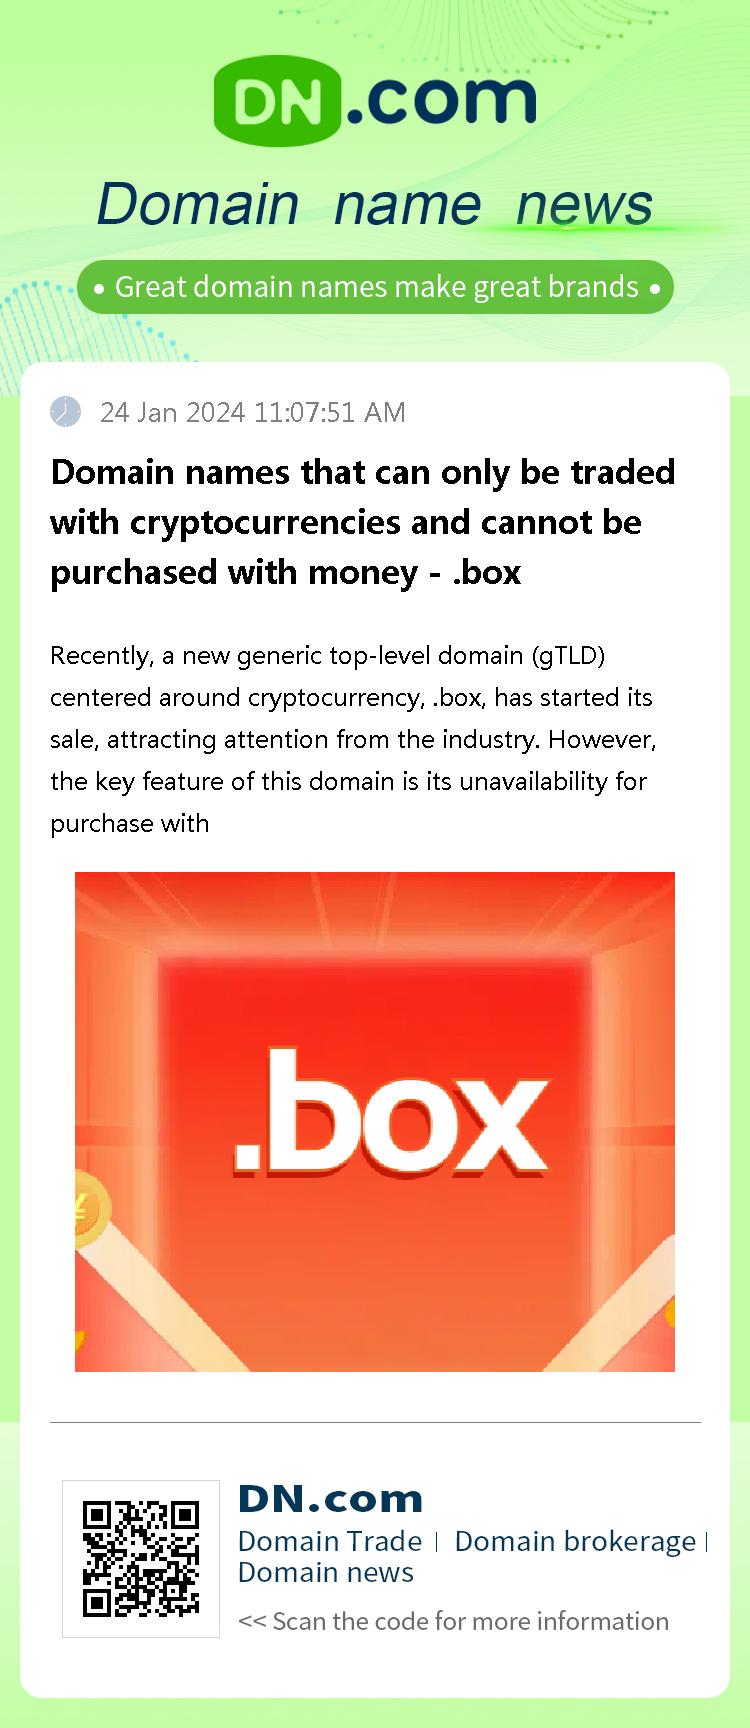 Domain names that can only be traded with cryptocurrencies and cannot be purchased with money - .box